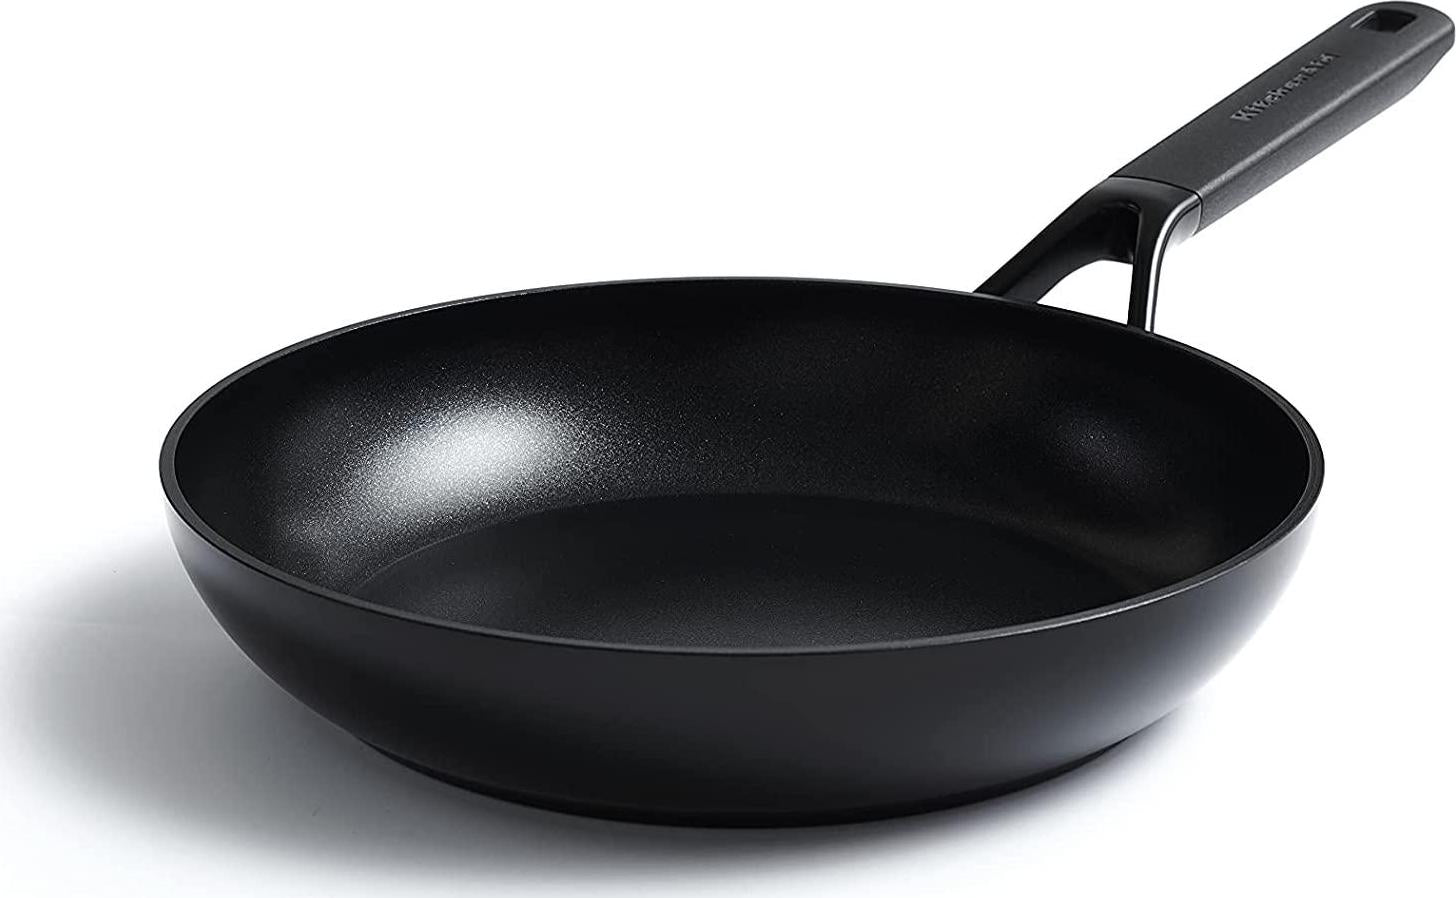 KitchenAid, KitchenAid Classic Frying Pan, Non Stick Aluminium 24cm Frying Pan with Stay-Cool Handle, Induction, Oven and Dishwasher Safe, Black